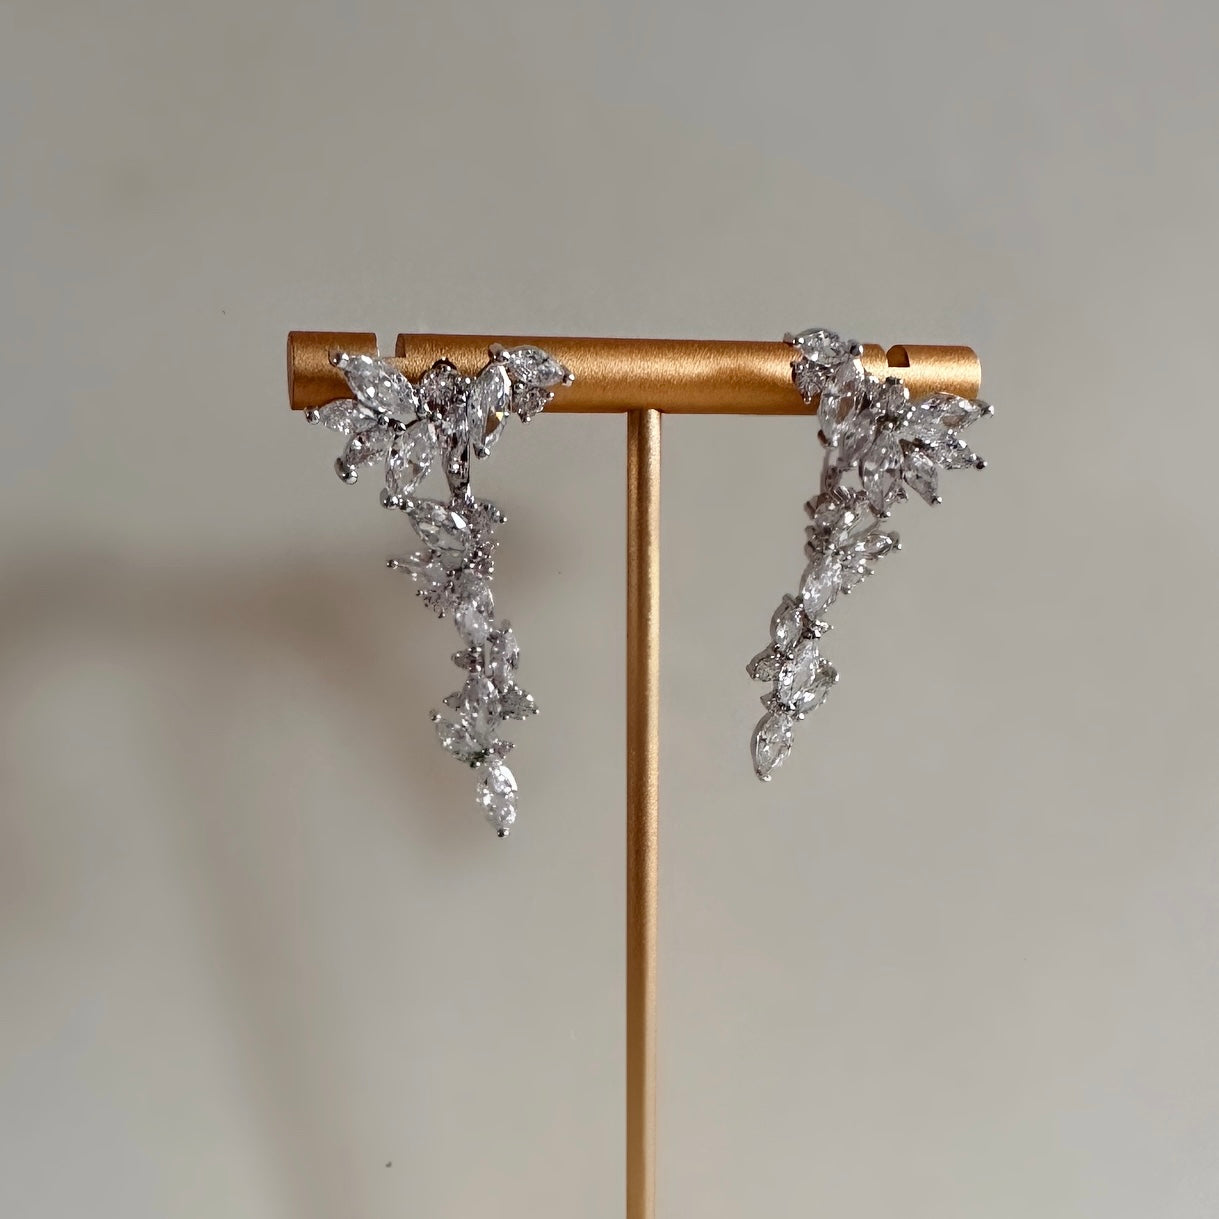 The Catherine Crystal Drop Earrings are an elegant and timeless statement piece with their unique design. Crafted of luminous cz crystals, they bring an eye-catching sparkle to your look. Perfect for bringing a special touch of glamour to any occasion. Earring drop 4cm